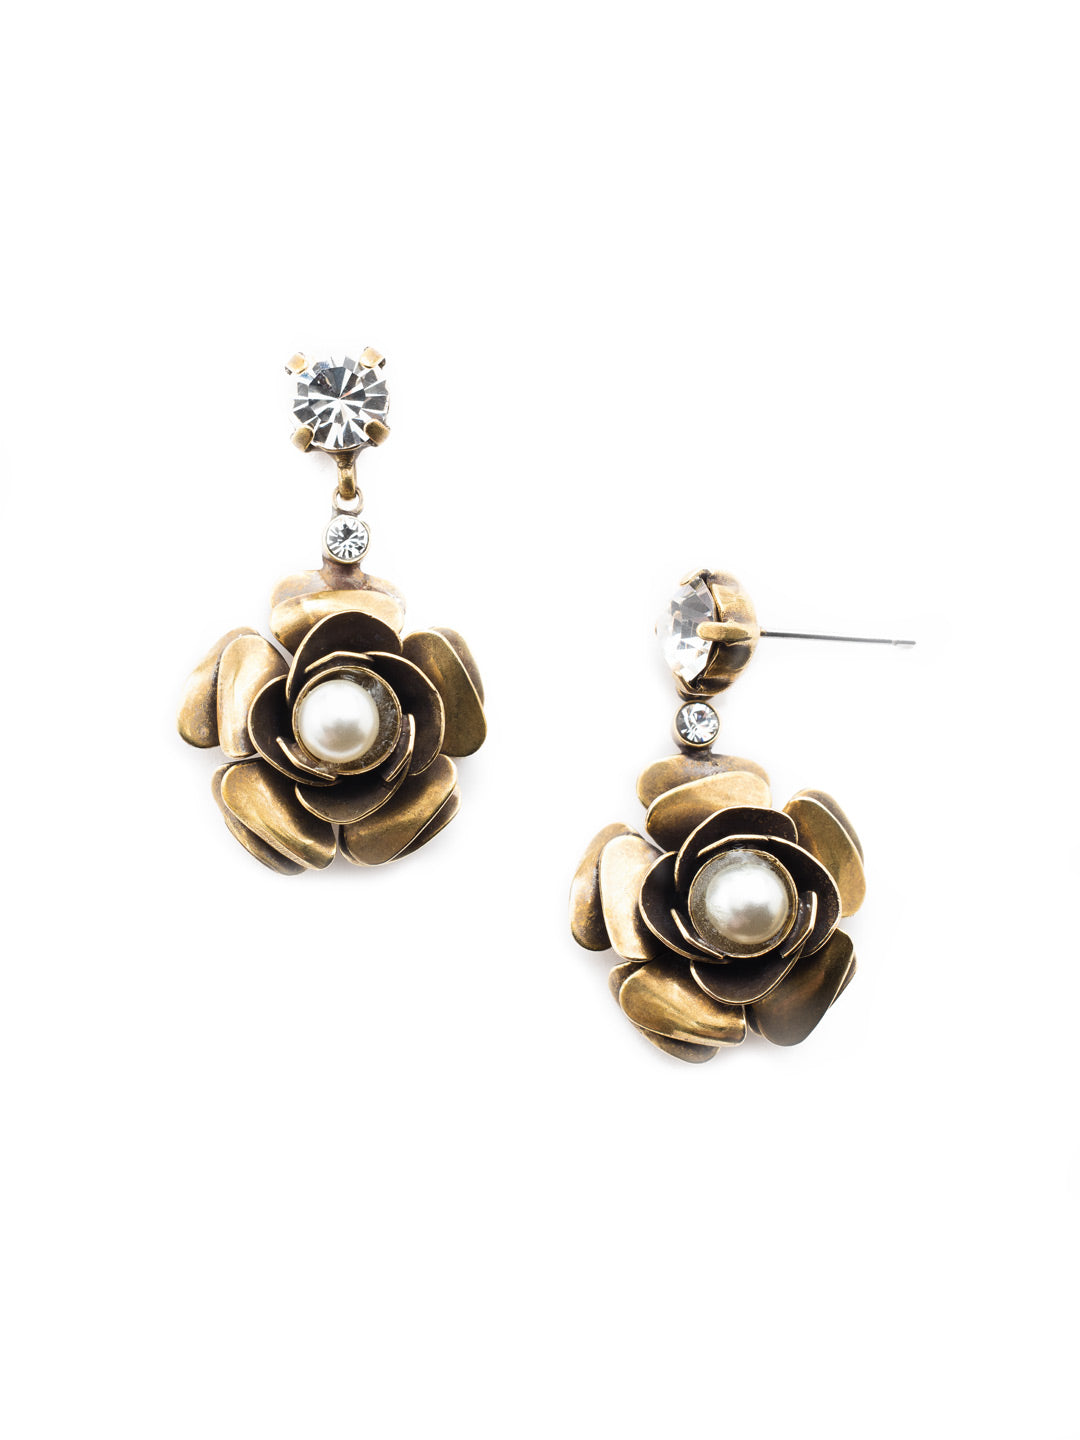 Rose Dangle Earrings - EET80AGMDP - The Rose Dangle Earrings are pure elegance. Perfect for any event with floral like metalwork. From Sorrelli's Modern Pearl collection in our Antique Gold-tone finish.